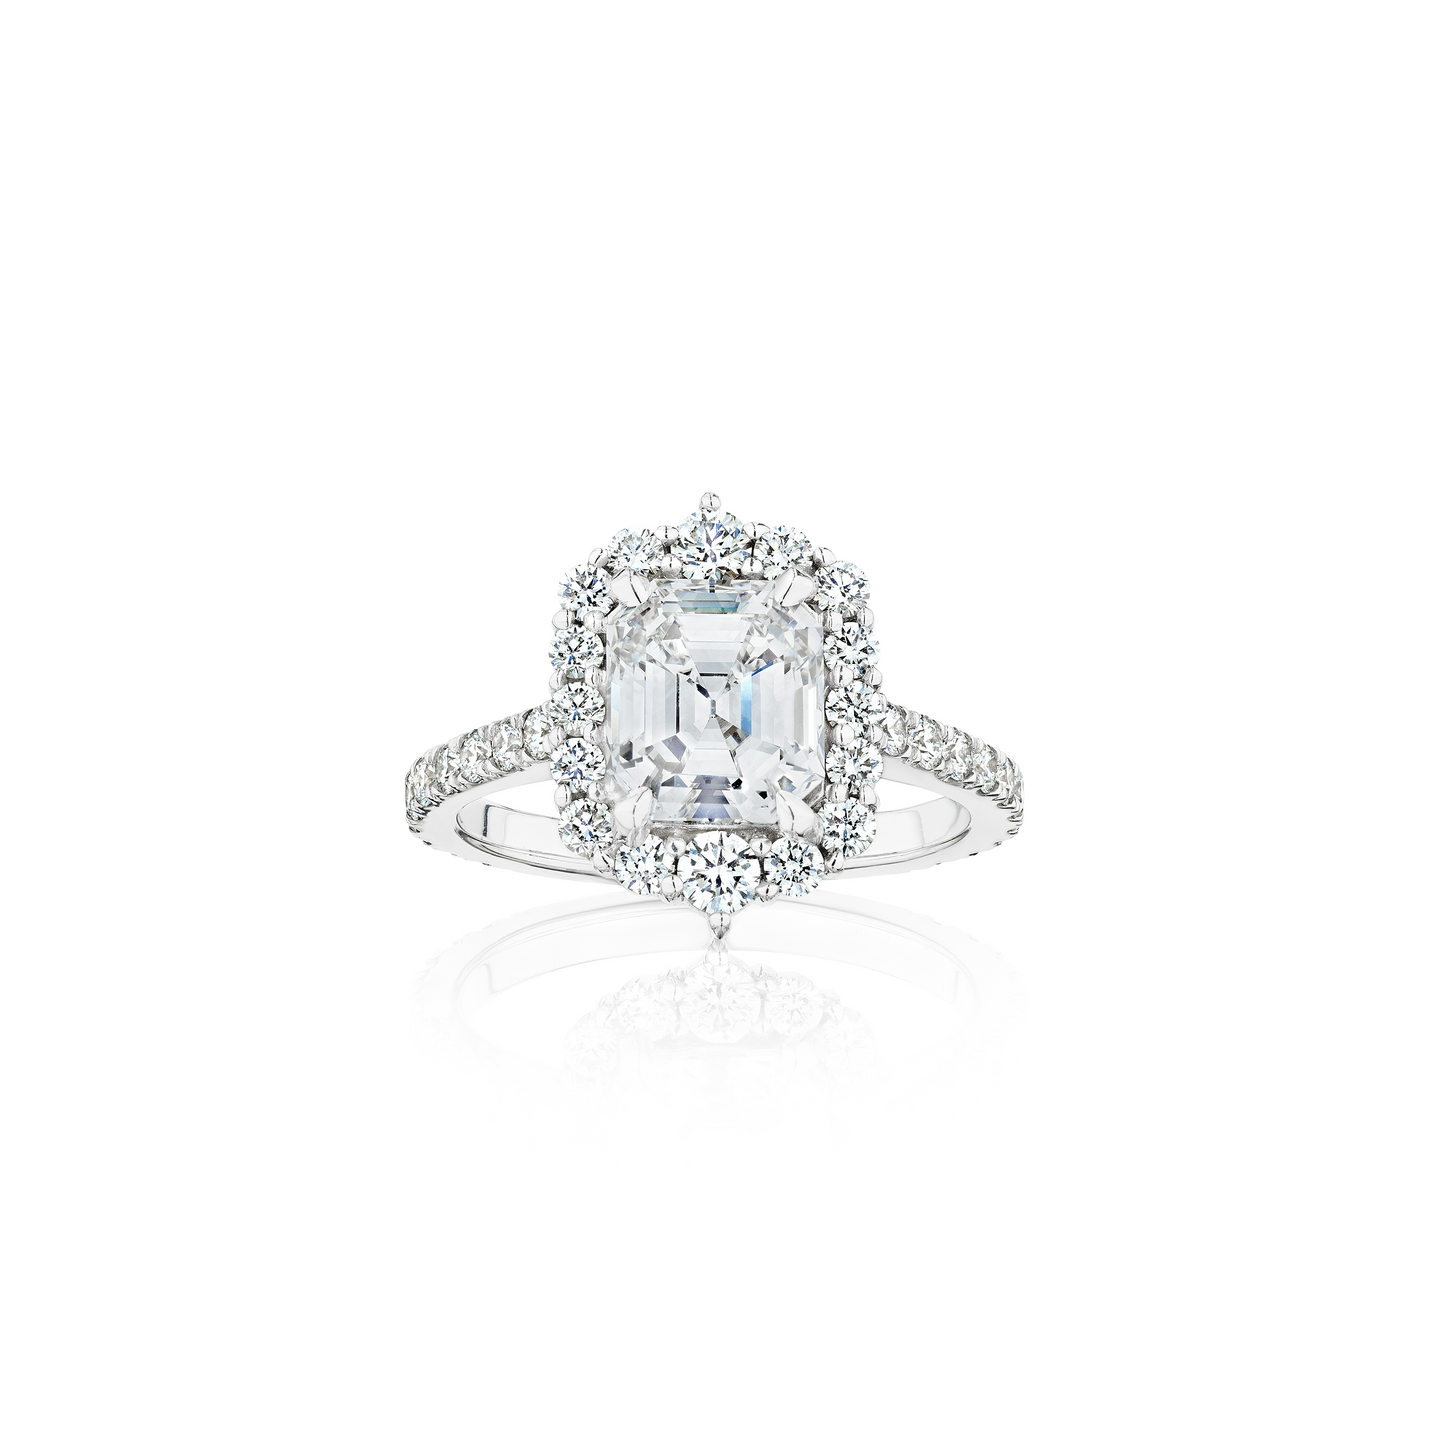 Fink's Exclusive White Gold Halo Asscher Diamond Engagement Ring